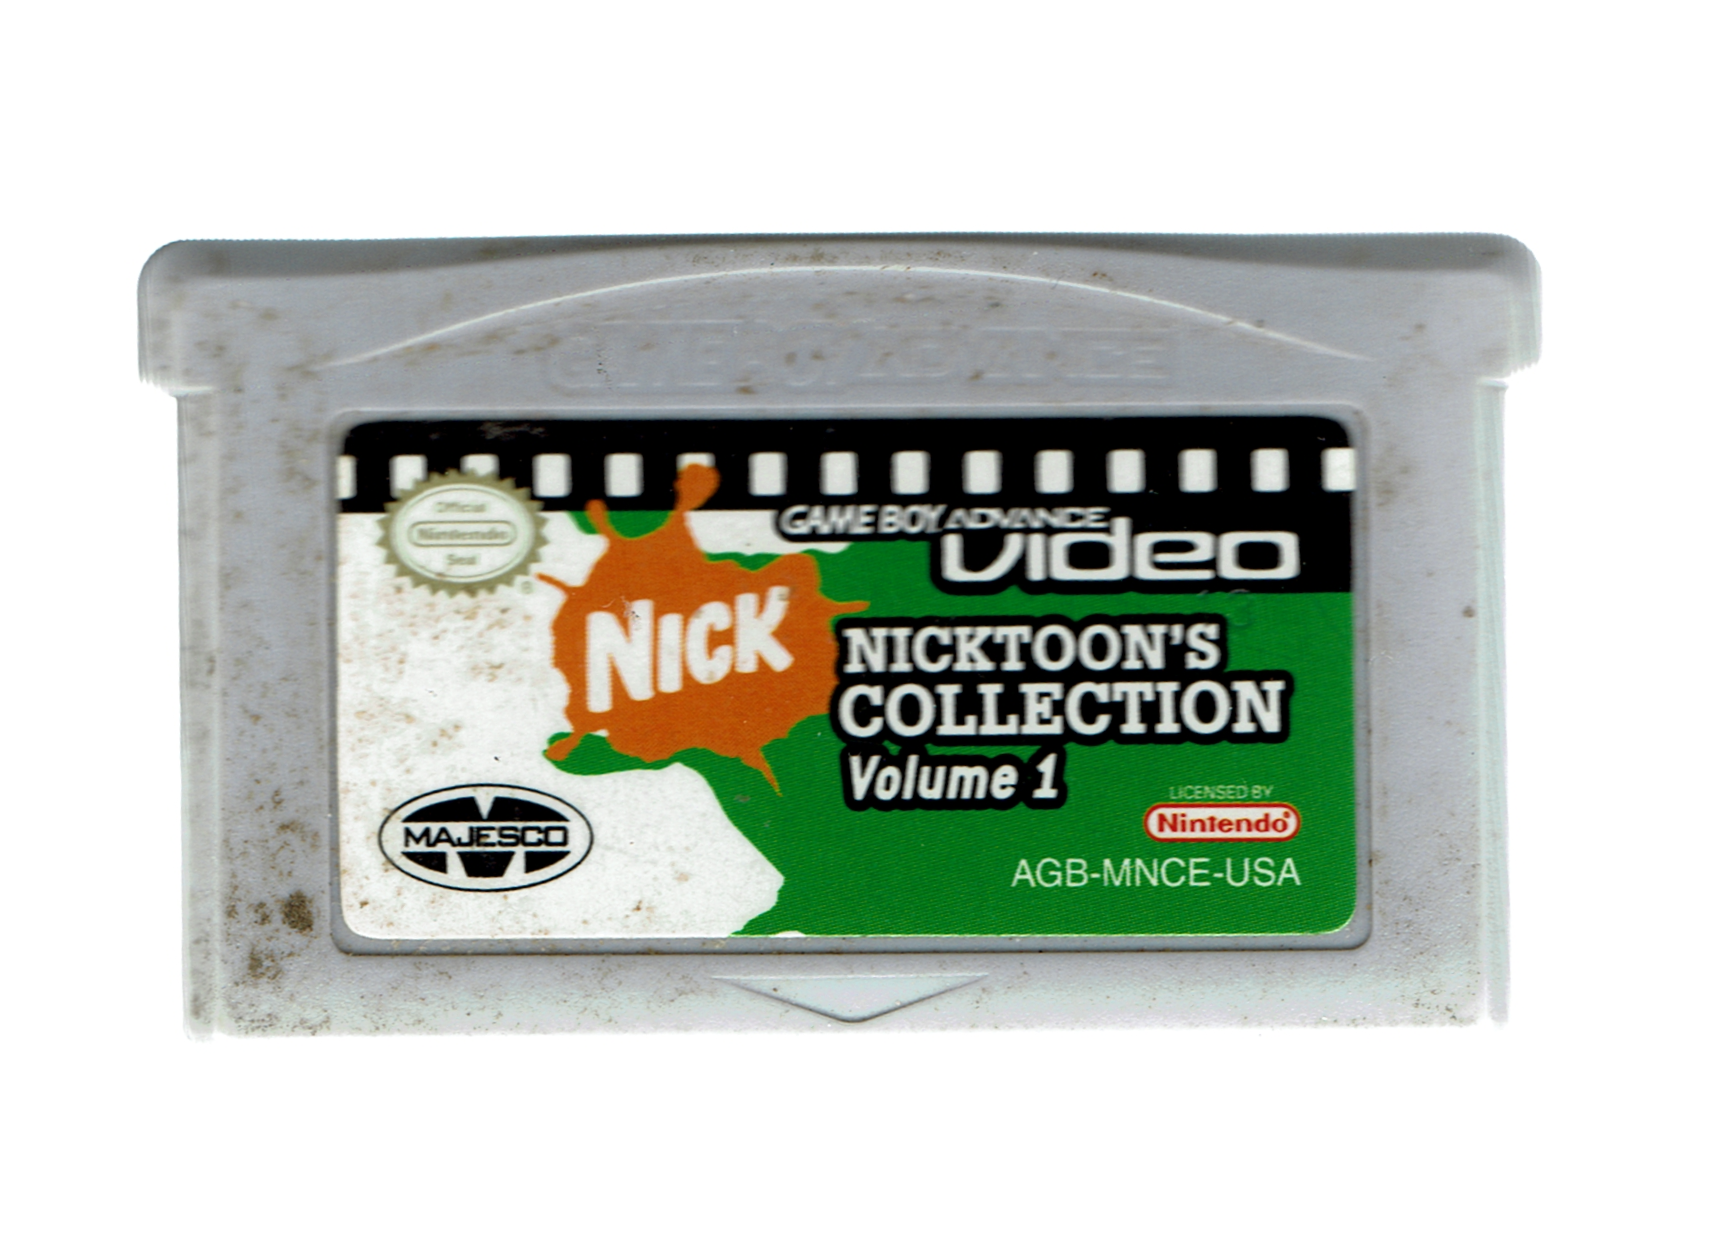 Nicktoons's Collection Volume 1